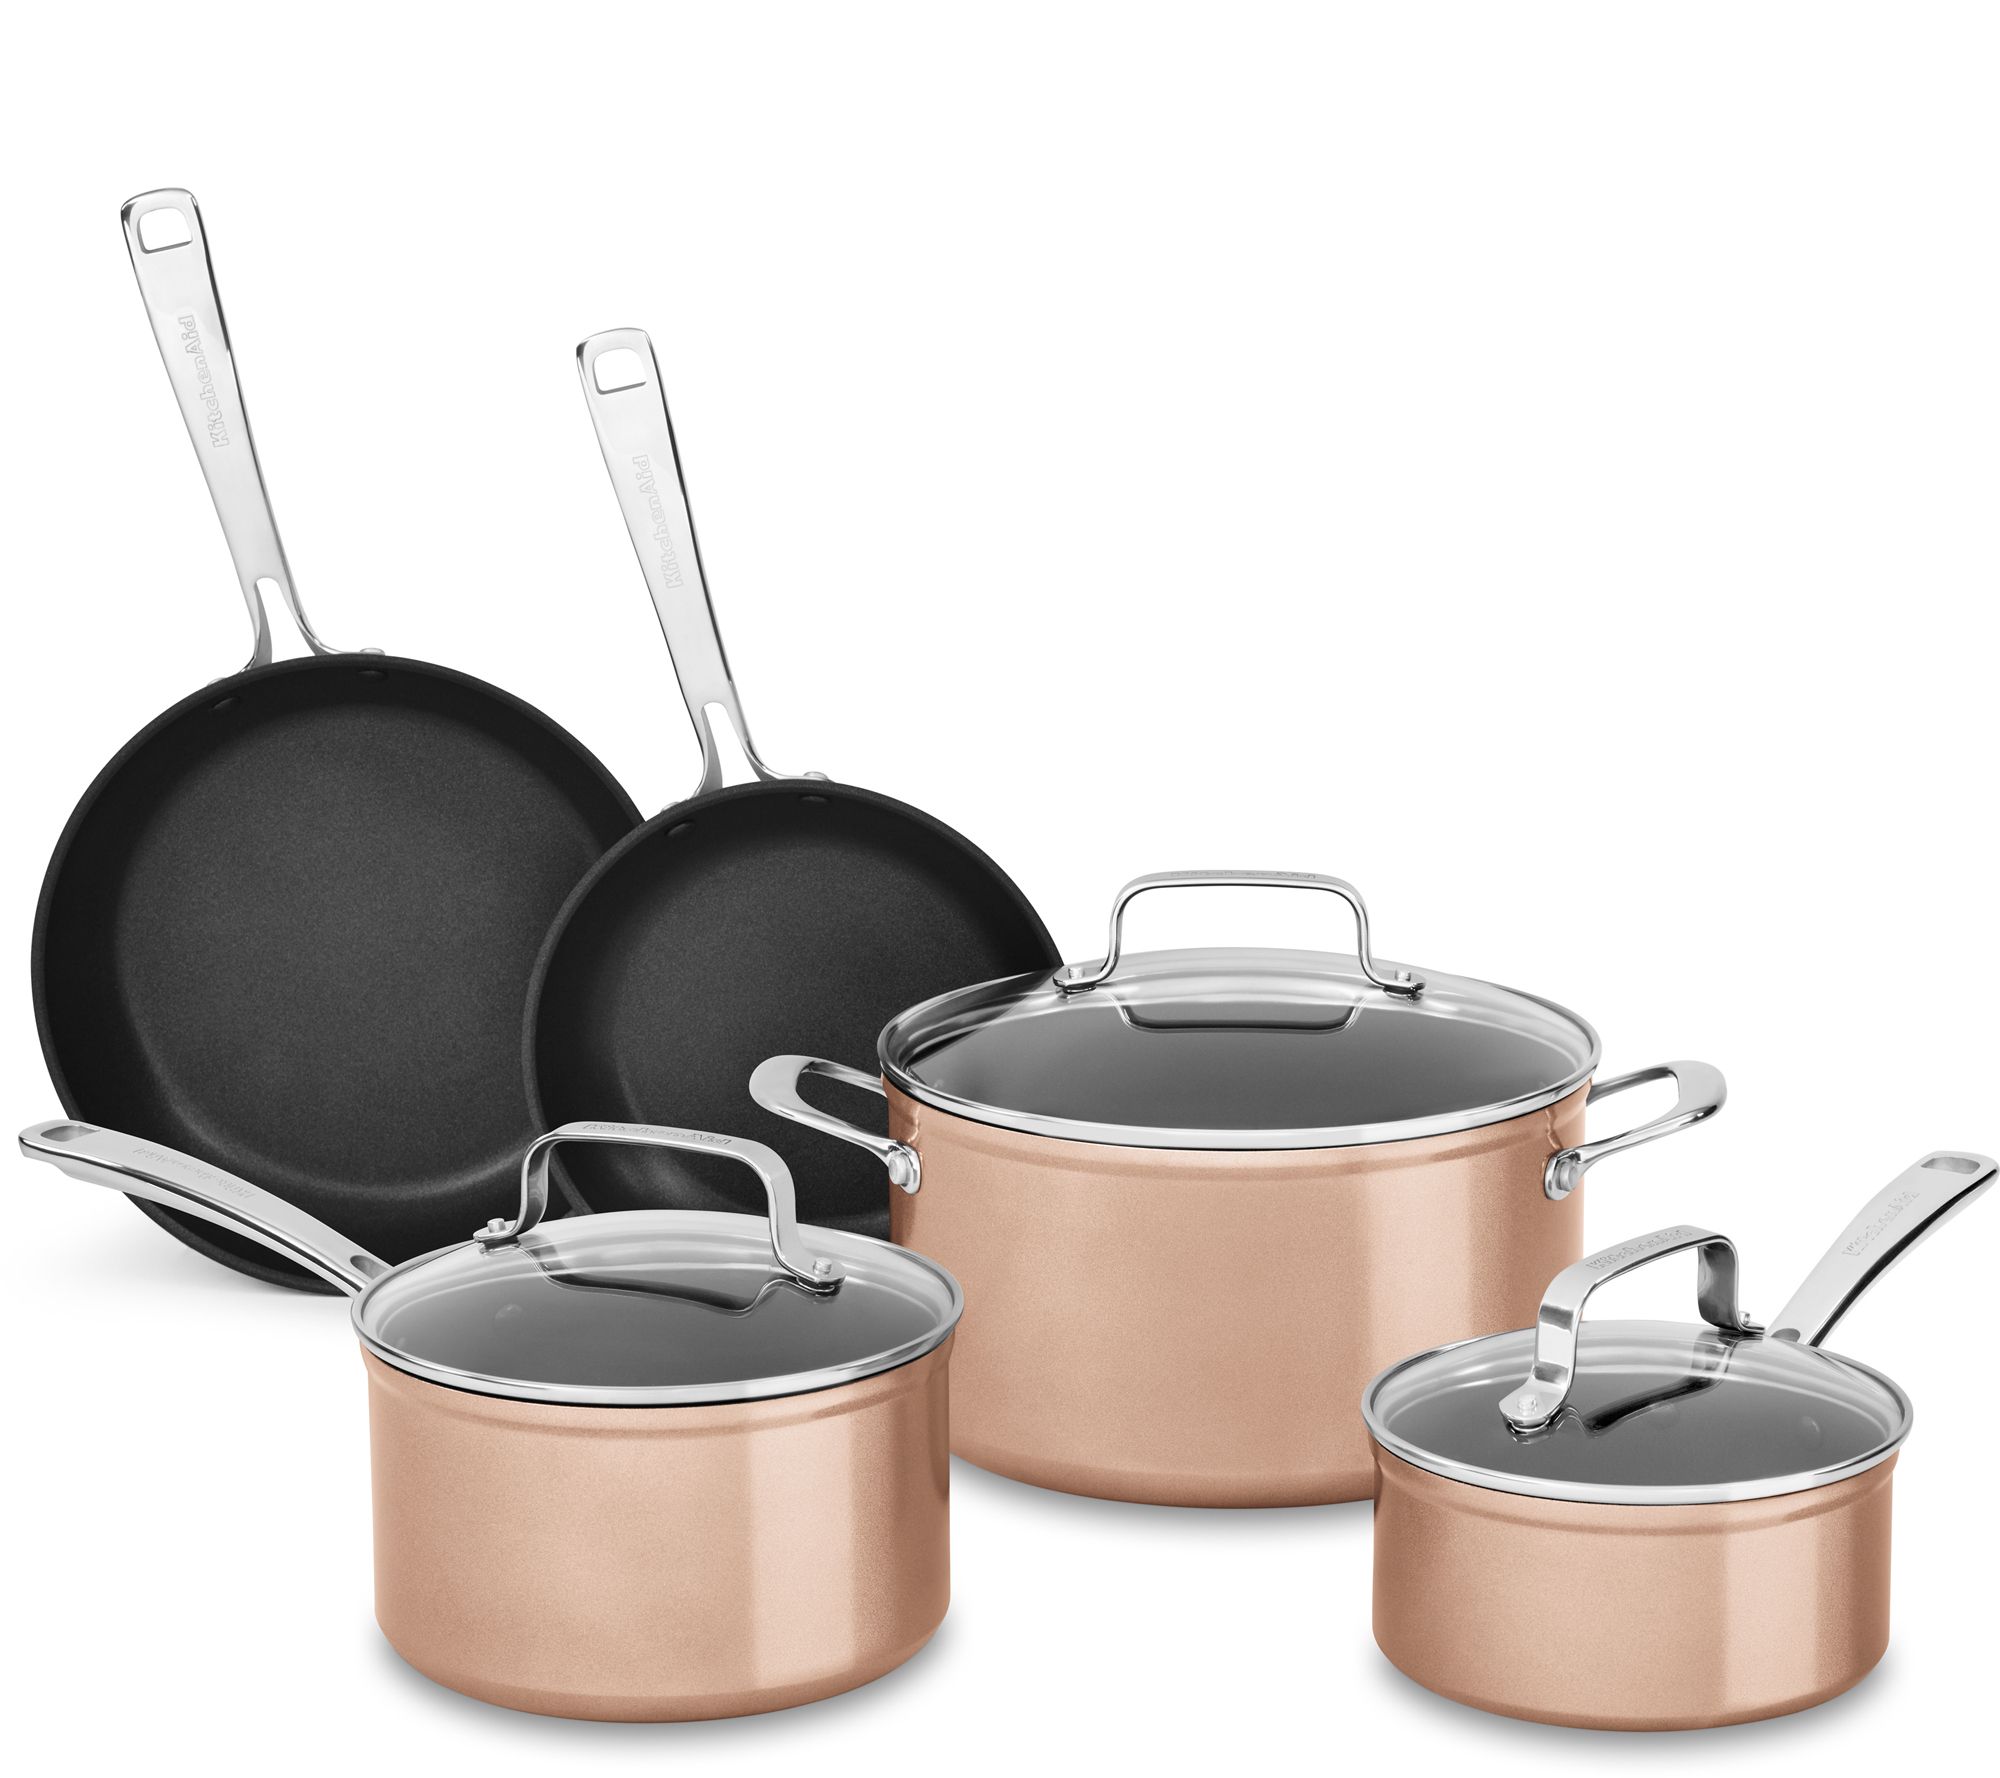 Nonstick Cookware Set from KitchenAid Is On Sale Today